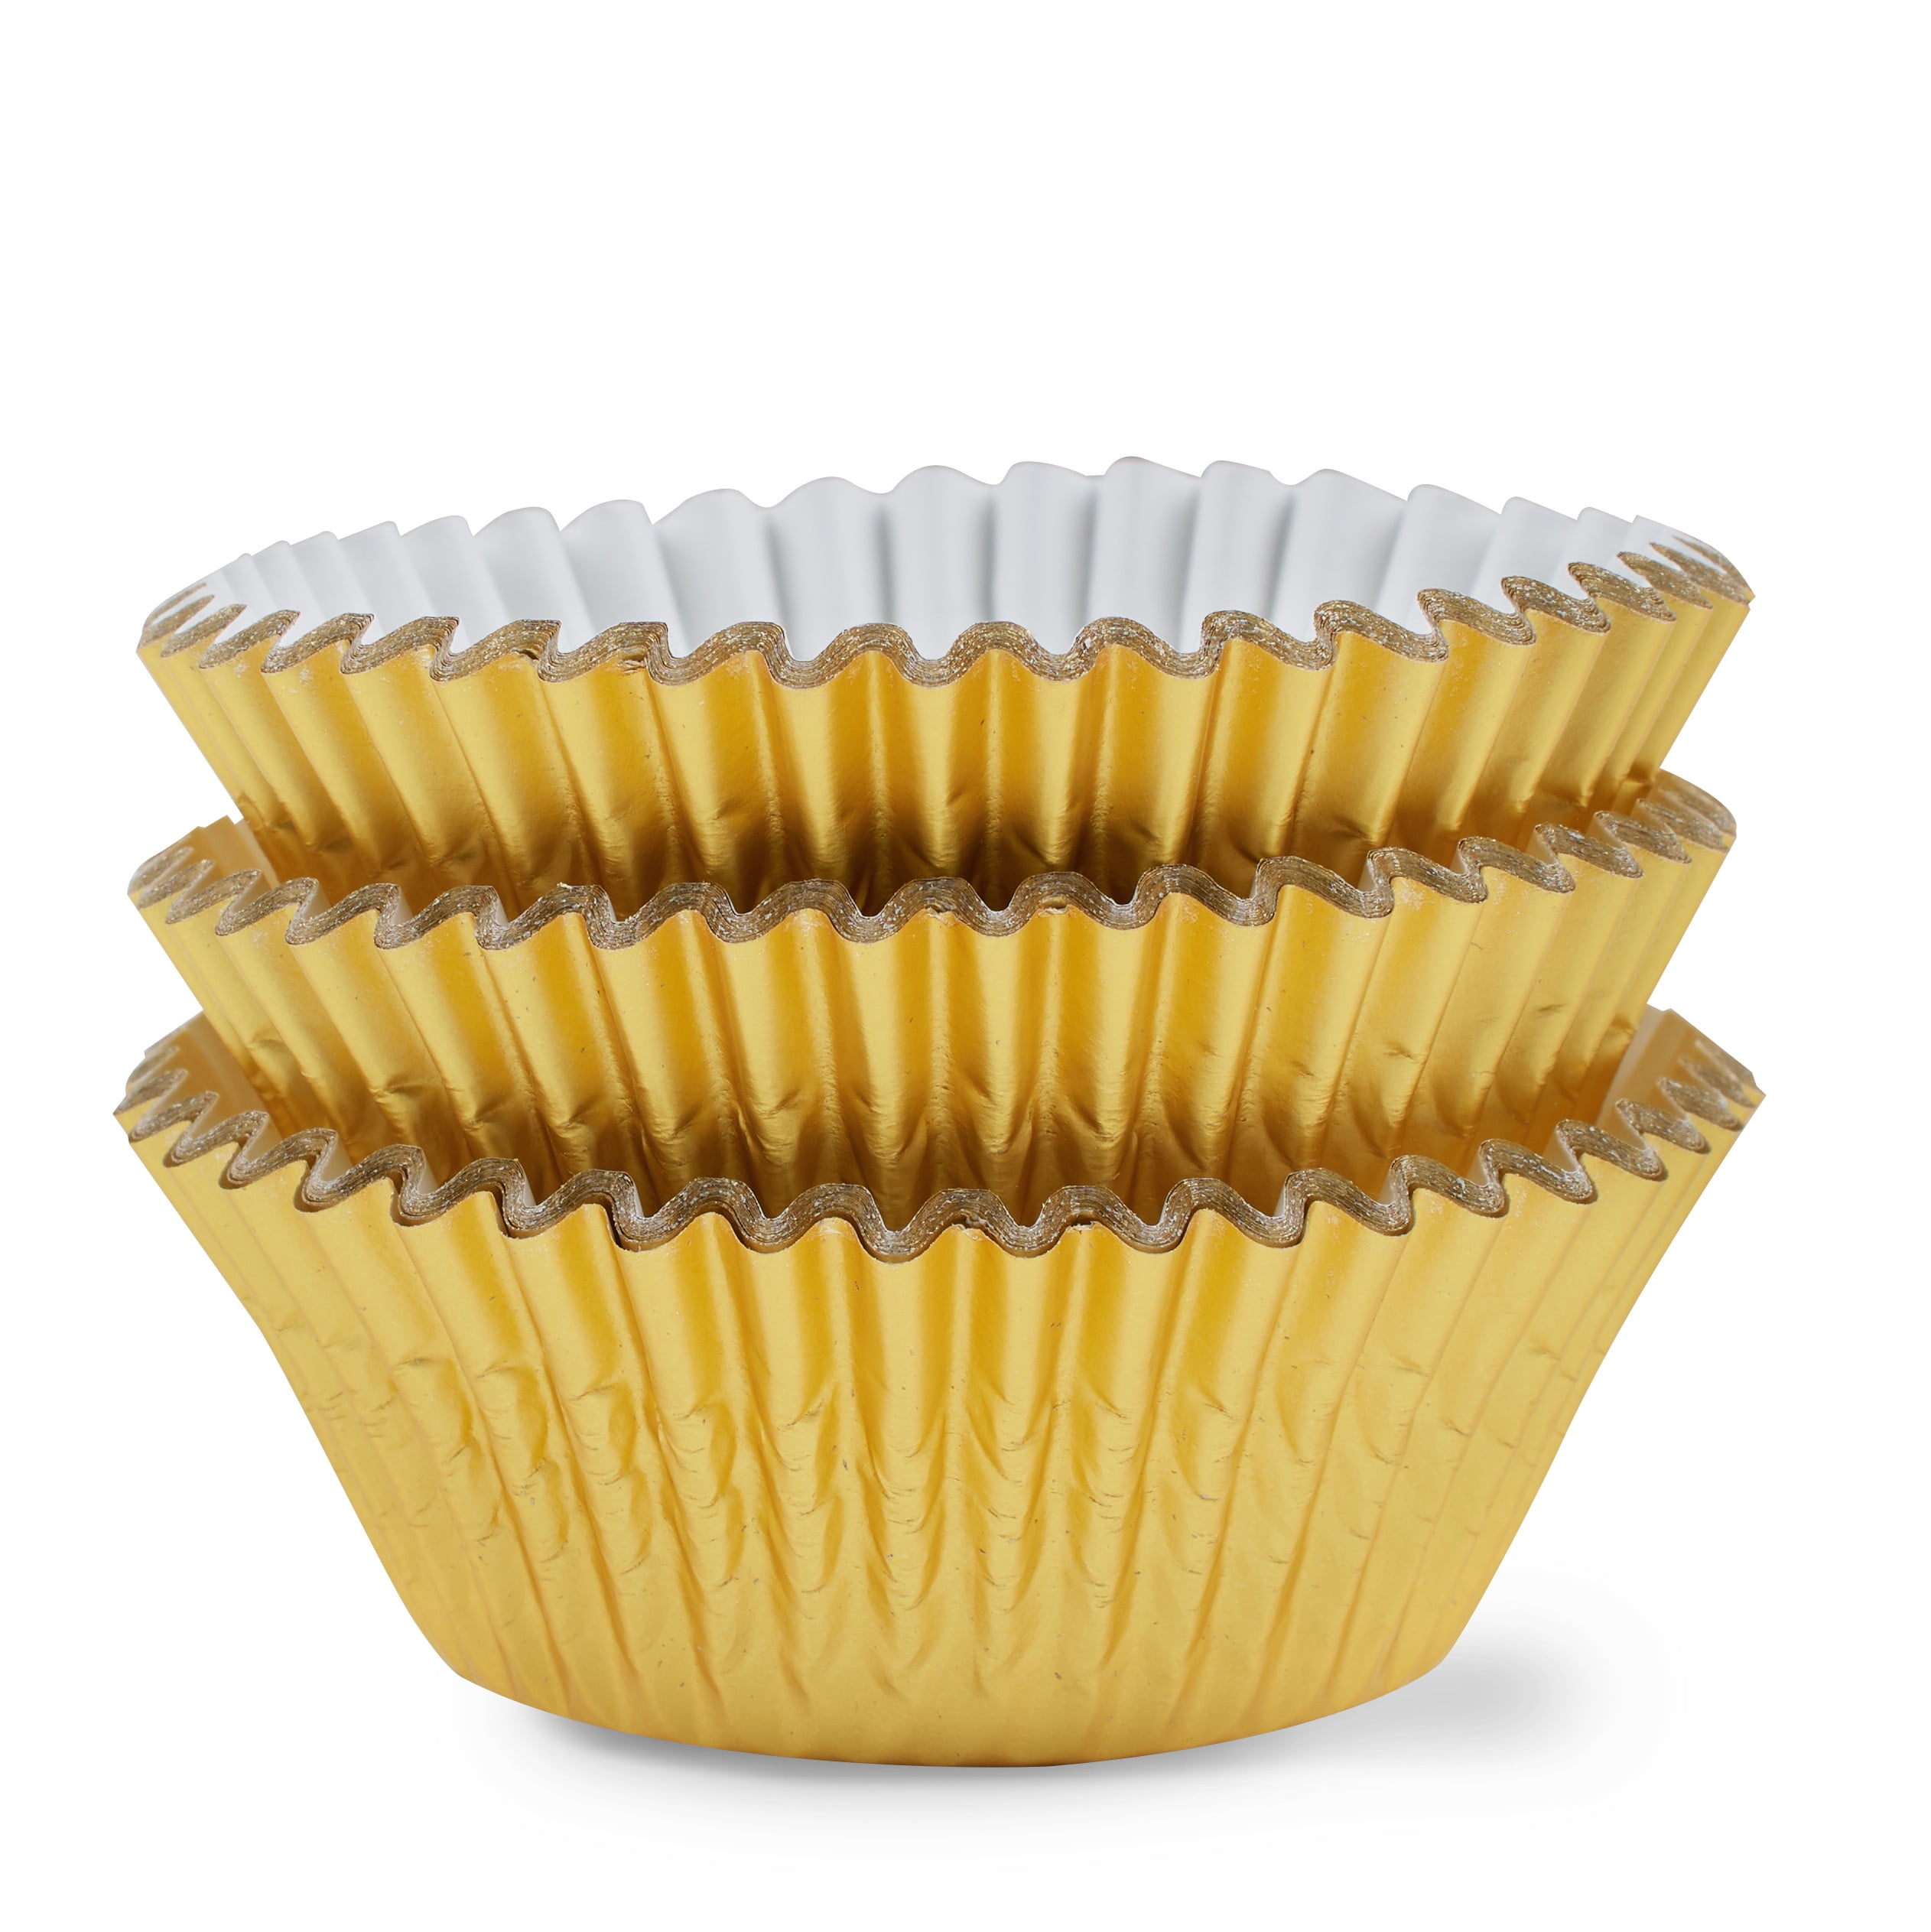 Great Value Cupcake Liners, Pink/Yellow/Blue, 96 Count